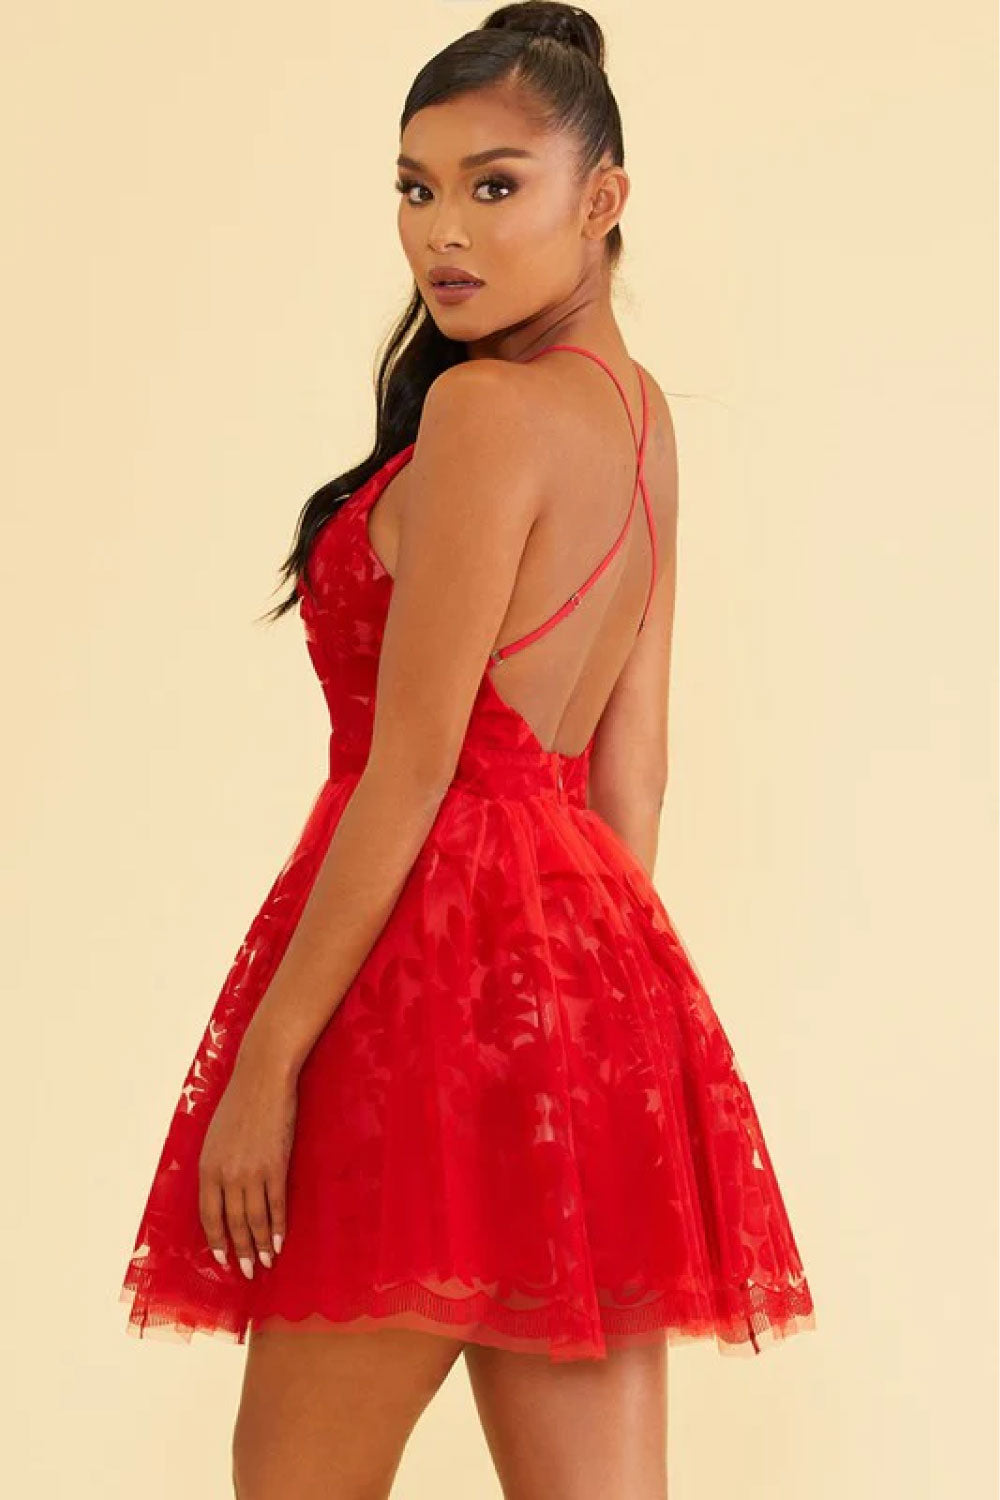 Image of the back of Luxxel's Elegant Lace Mini Dress in Red on a model.